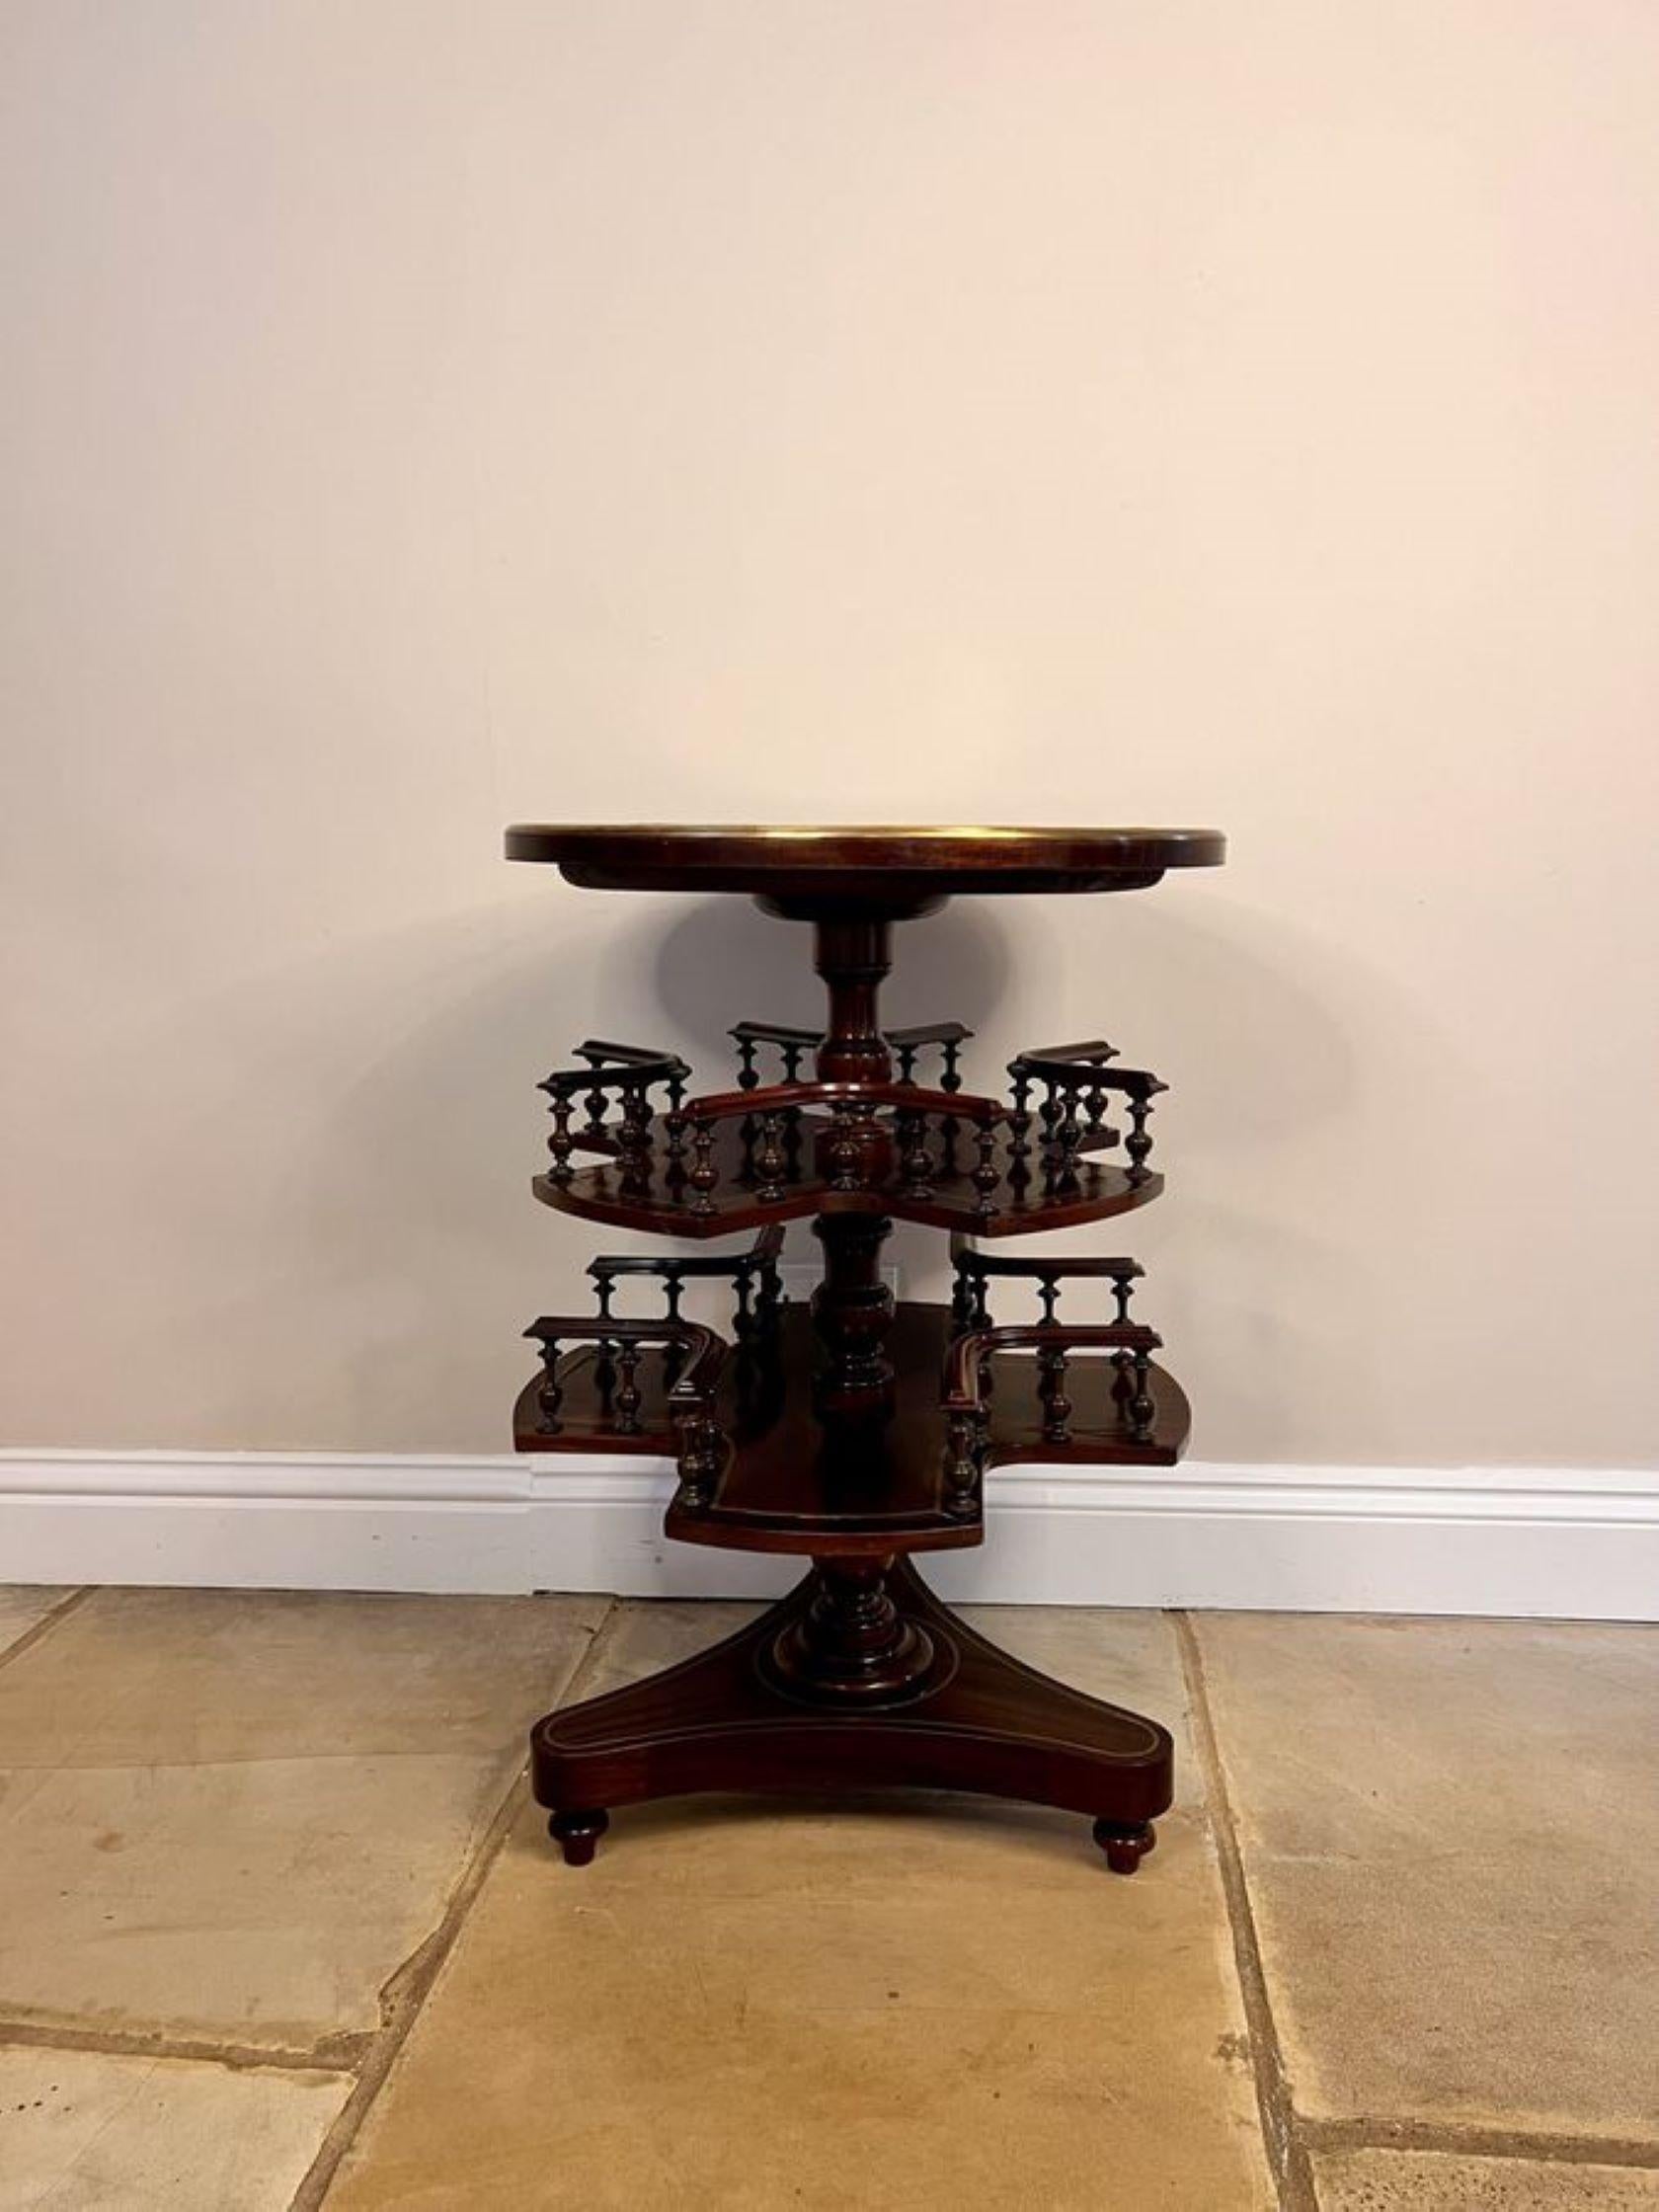 Unusual antique Victorian quality mahogany brass inlaid marble top revolving book table, having a quality circular mahogany brass inlaid top with a marble centre supported by a turned column, double shaped revolving book shelves with turned spindles